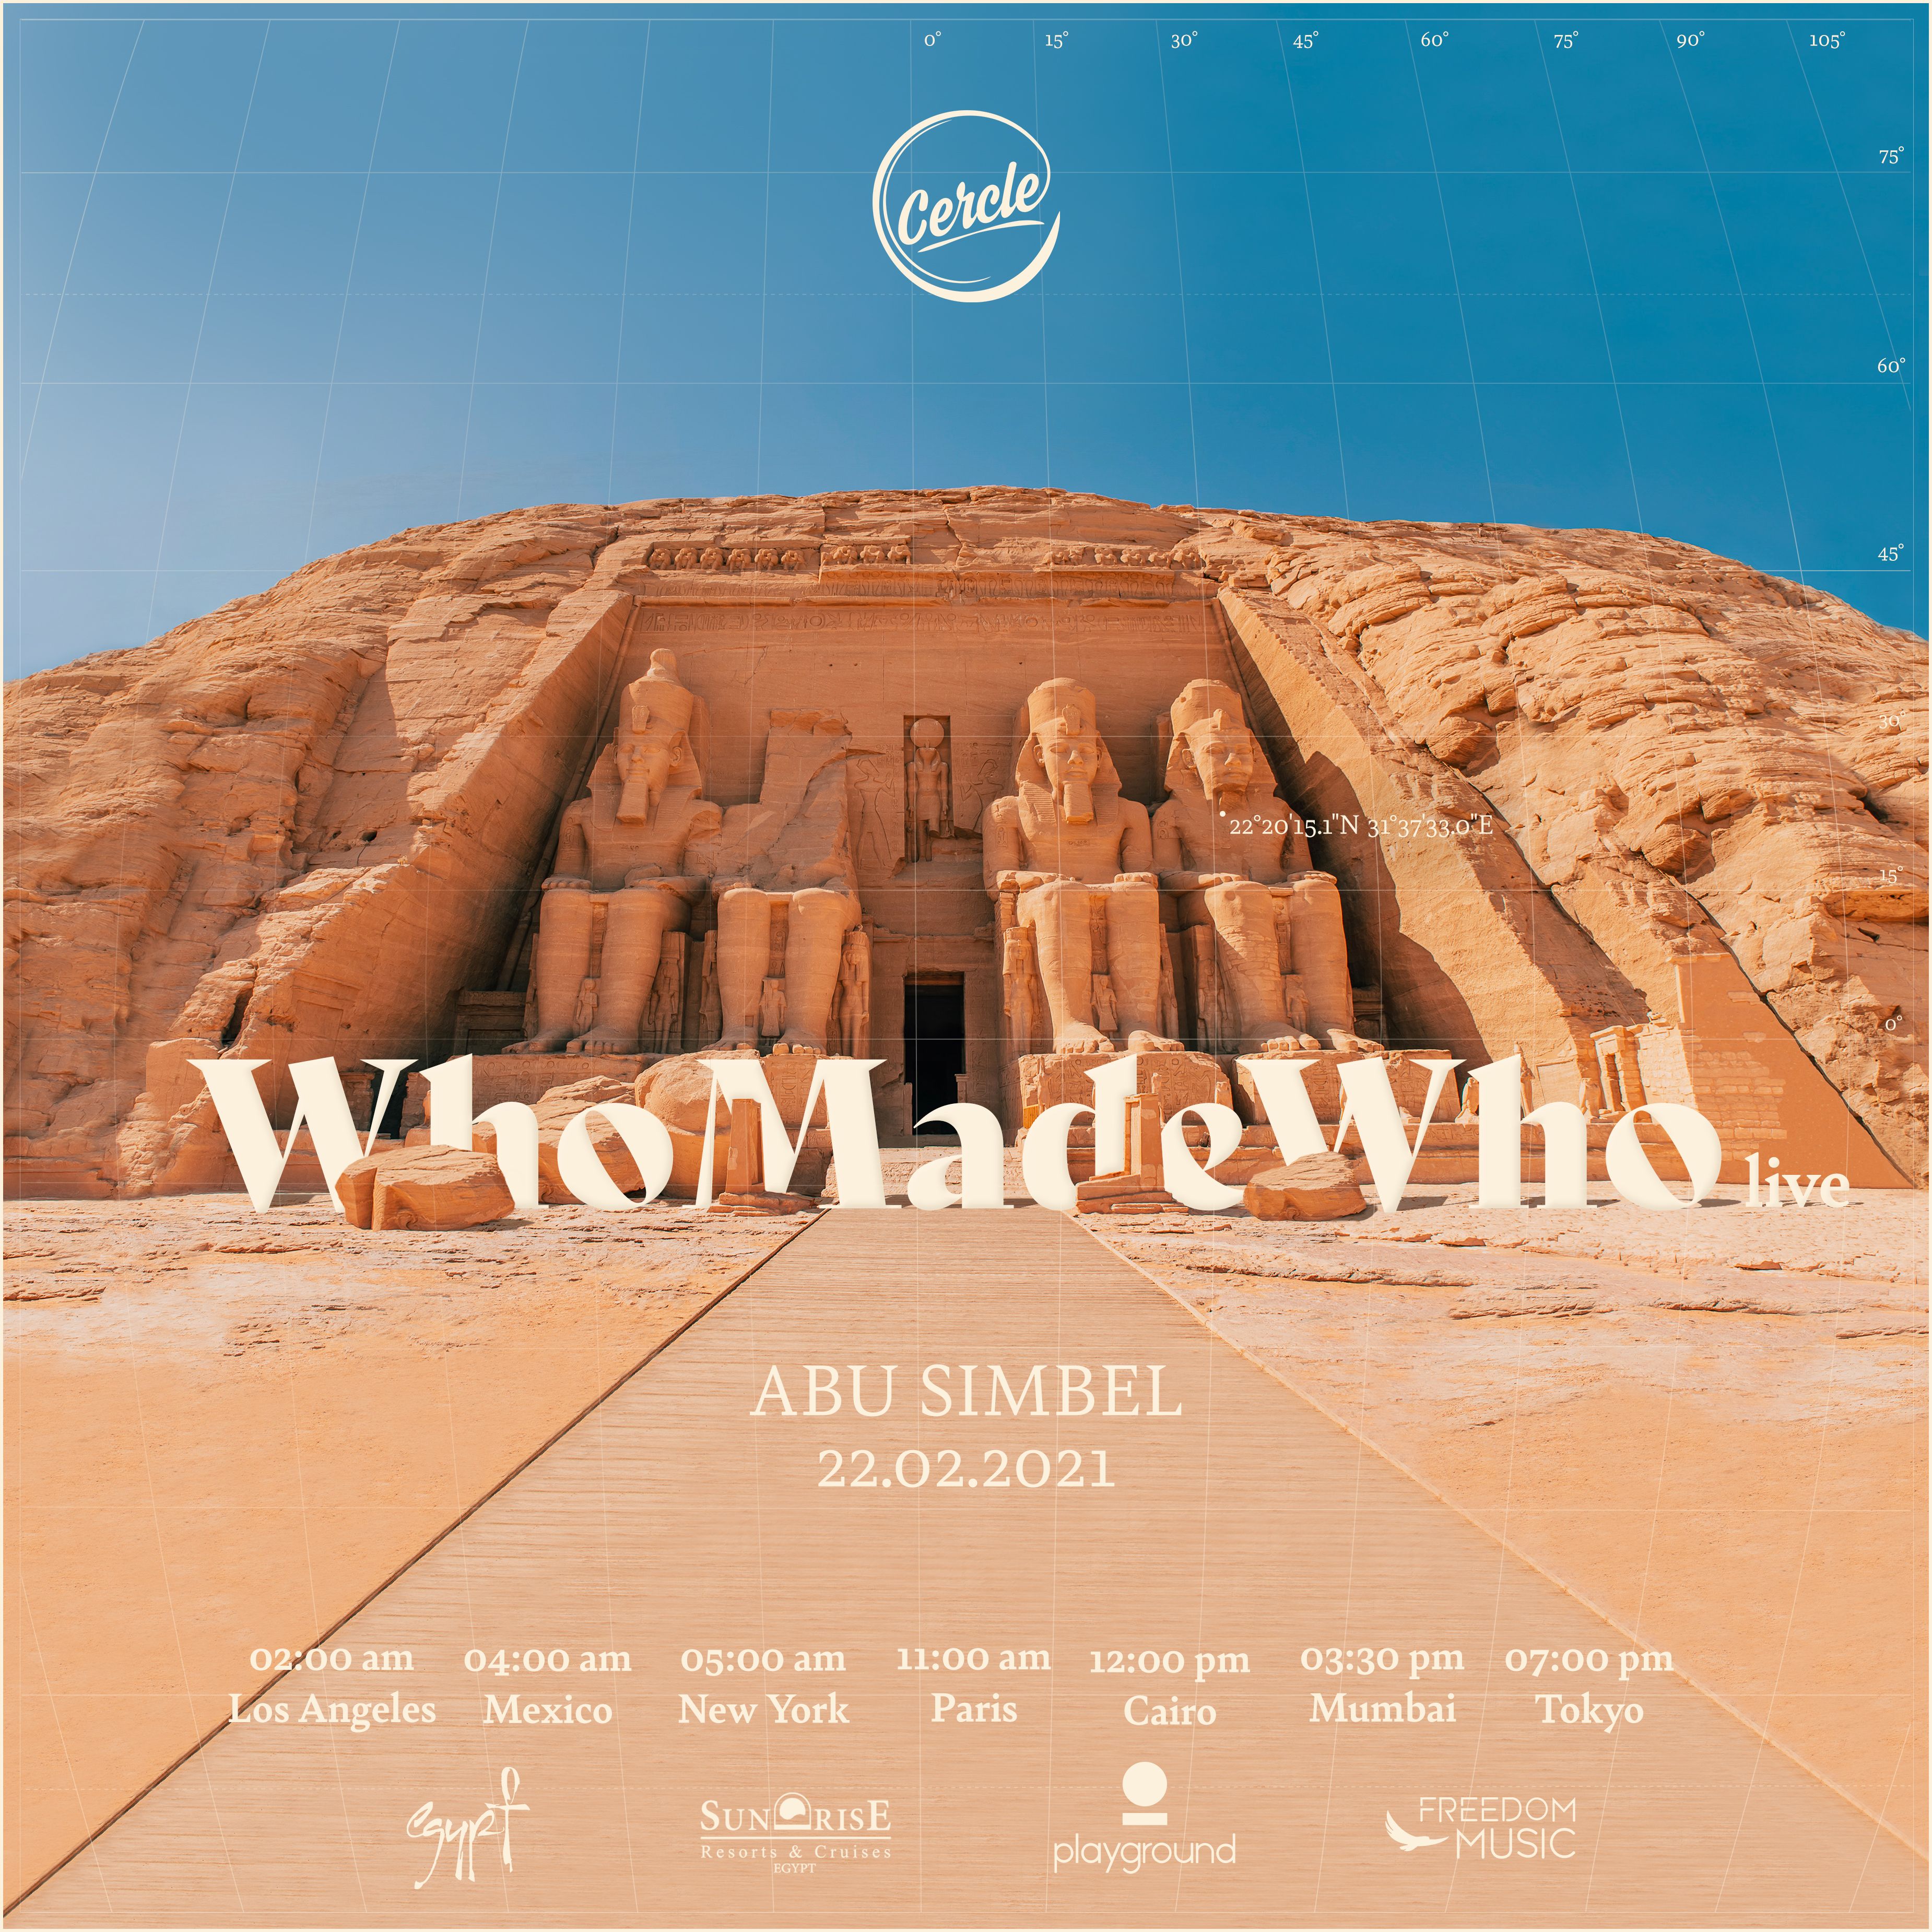 Жүктеу WhoMadeWho live at Abu Simbel, Egypt for Cercle